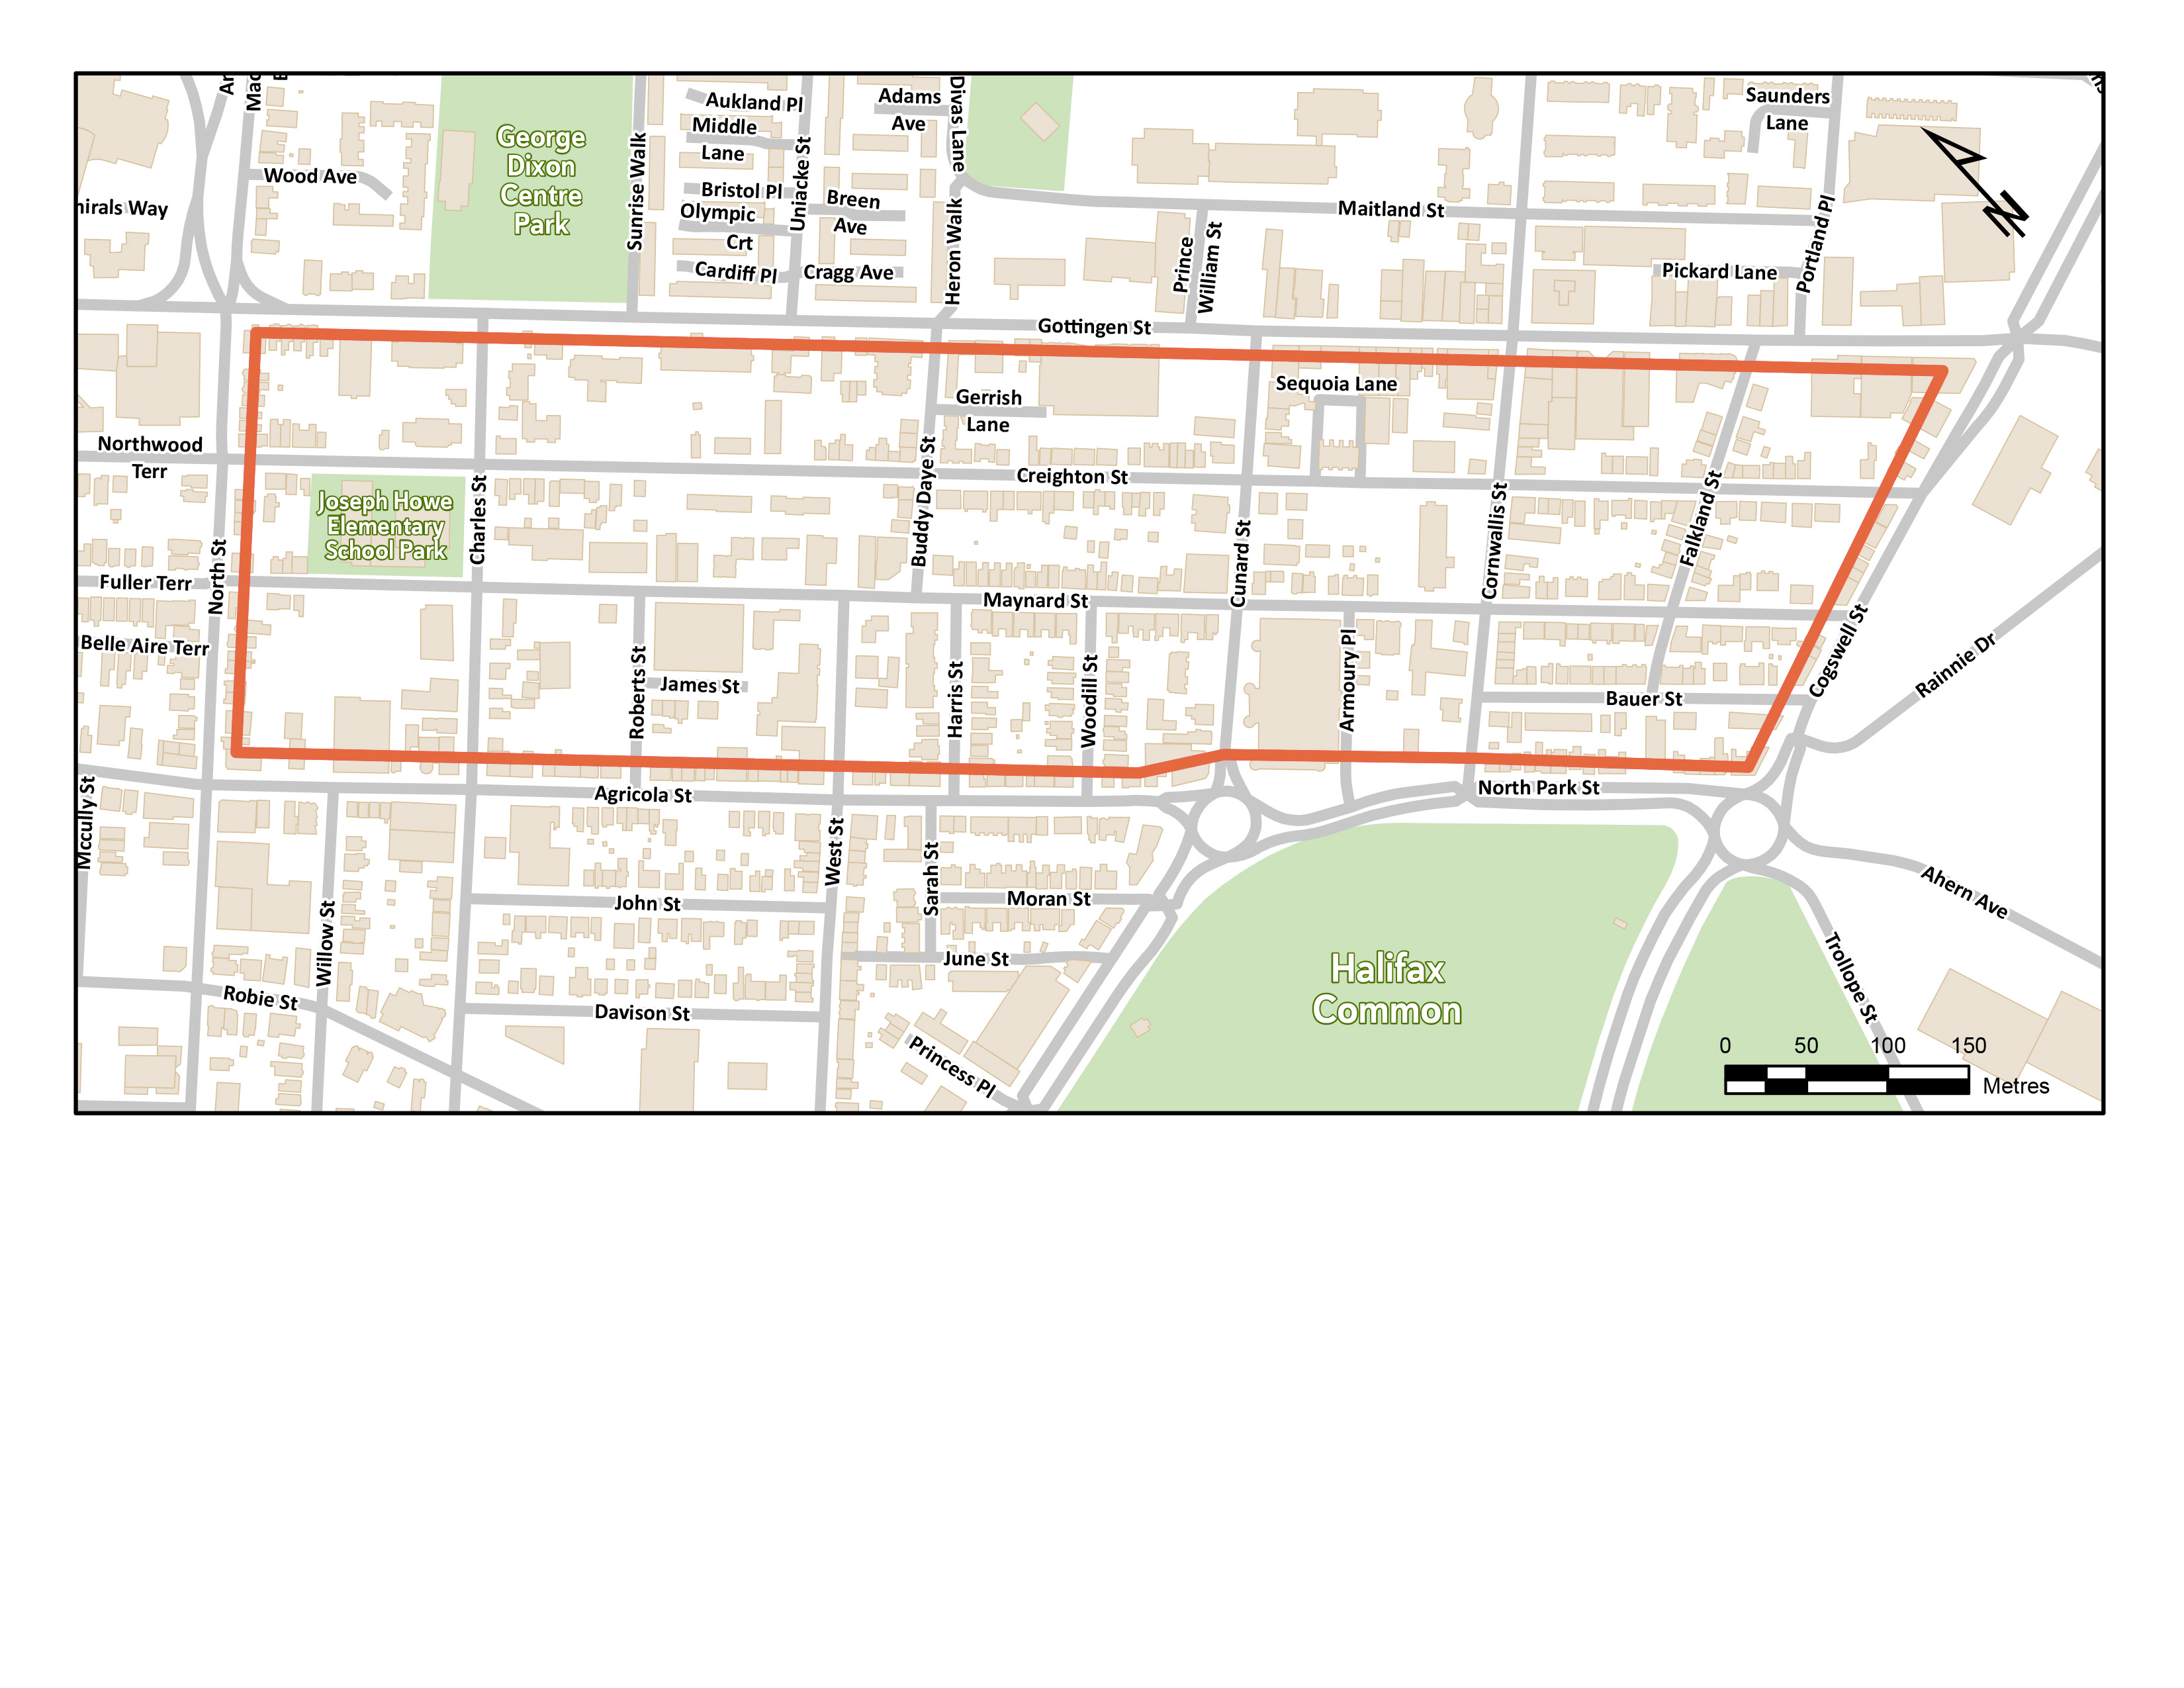 Map of streets impacted by speed limit change in the Creighton-Maynard streets neighbourhood 